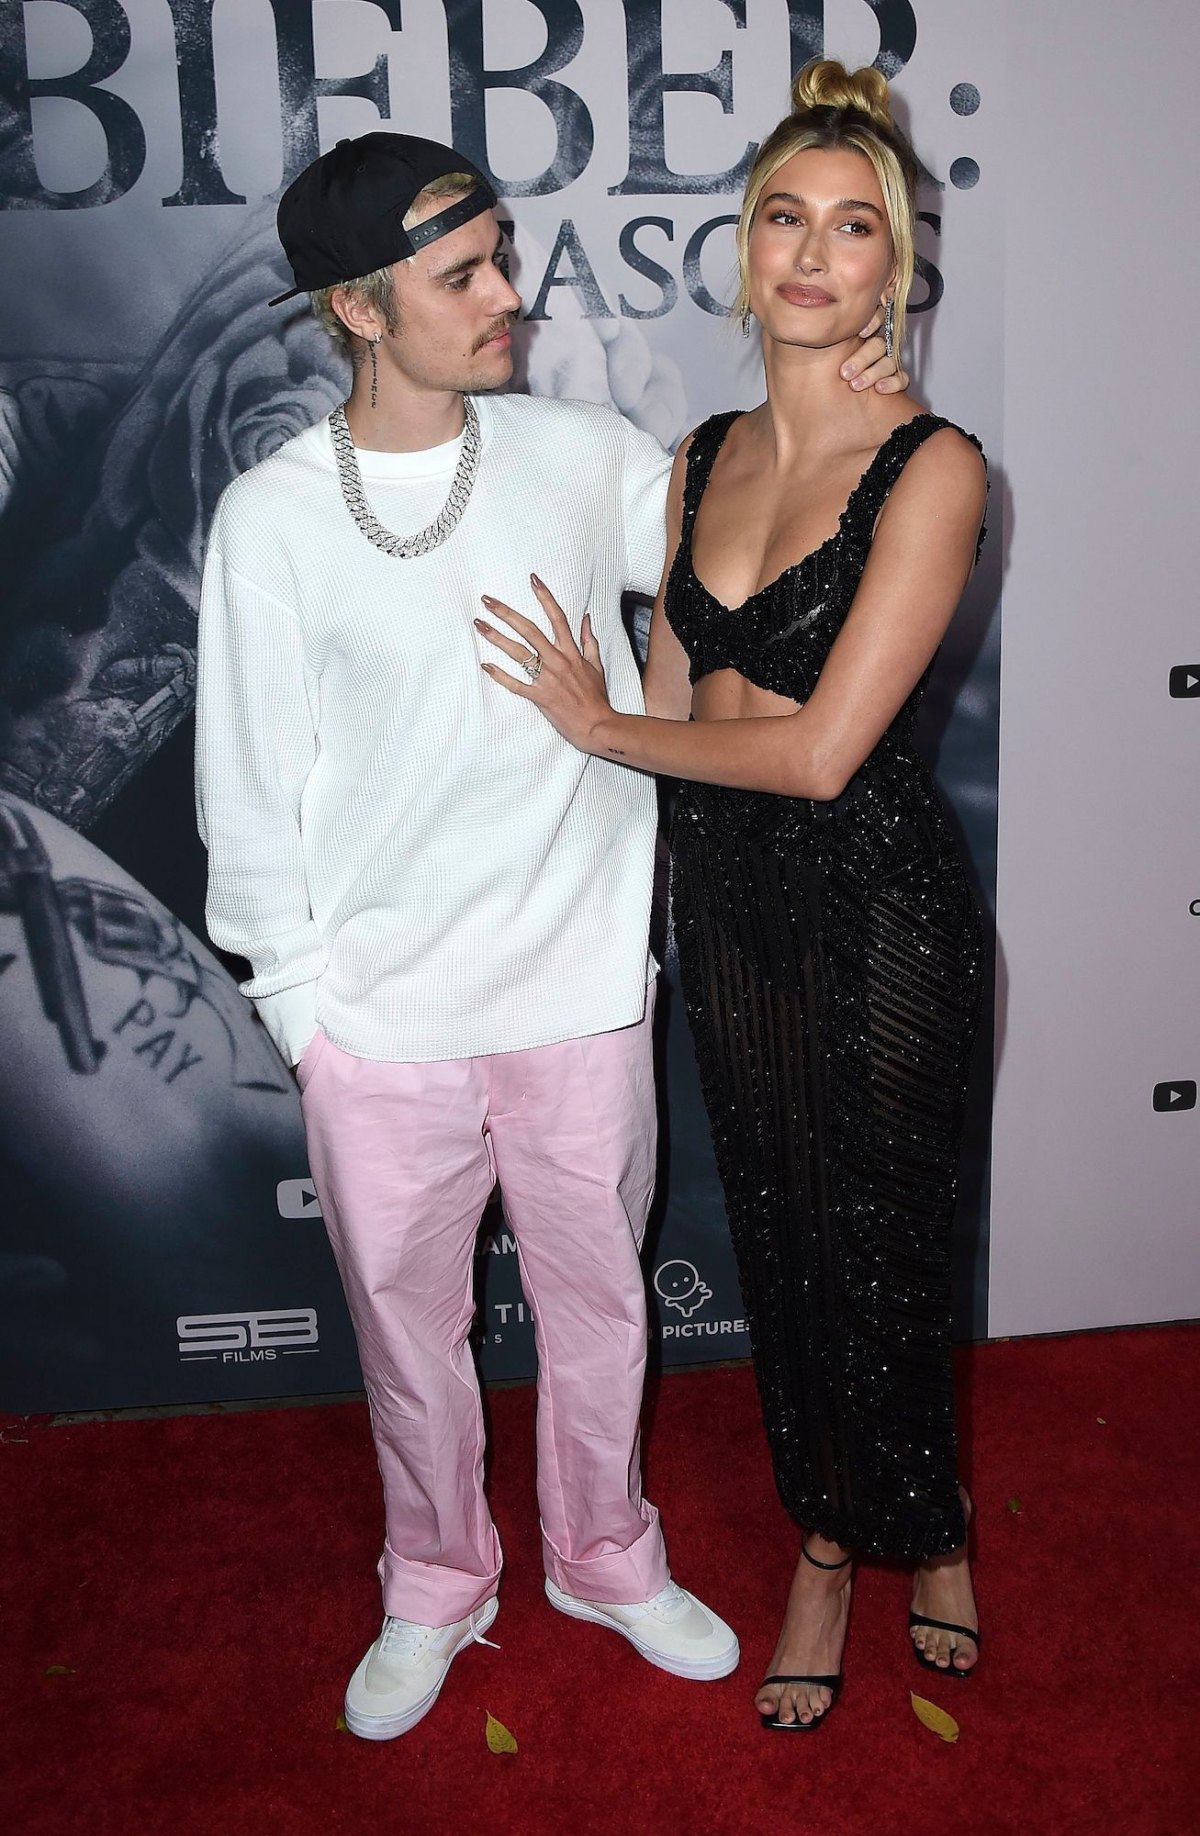 Married Life With Hailey and Justin Bieber, Gucci Pulls Racist Product